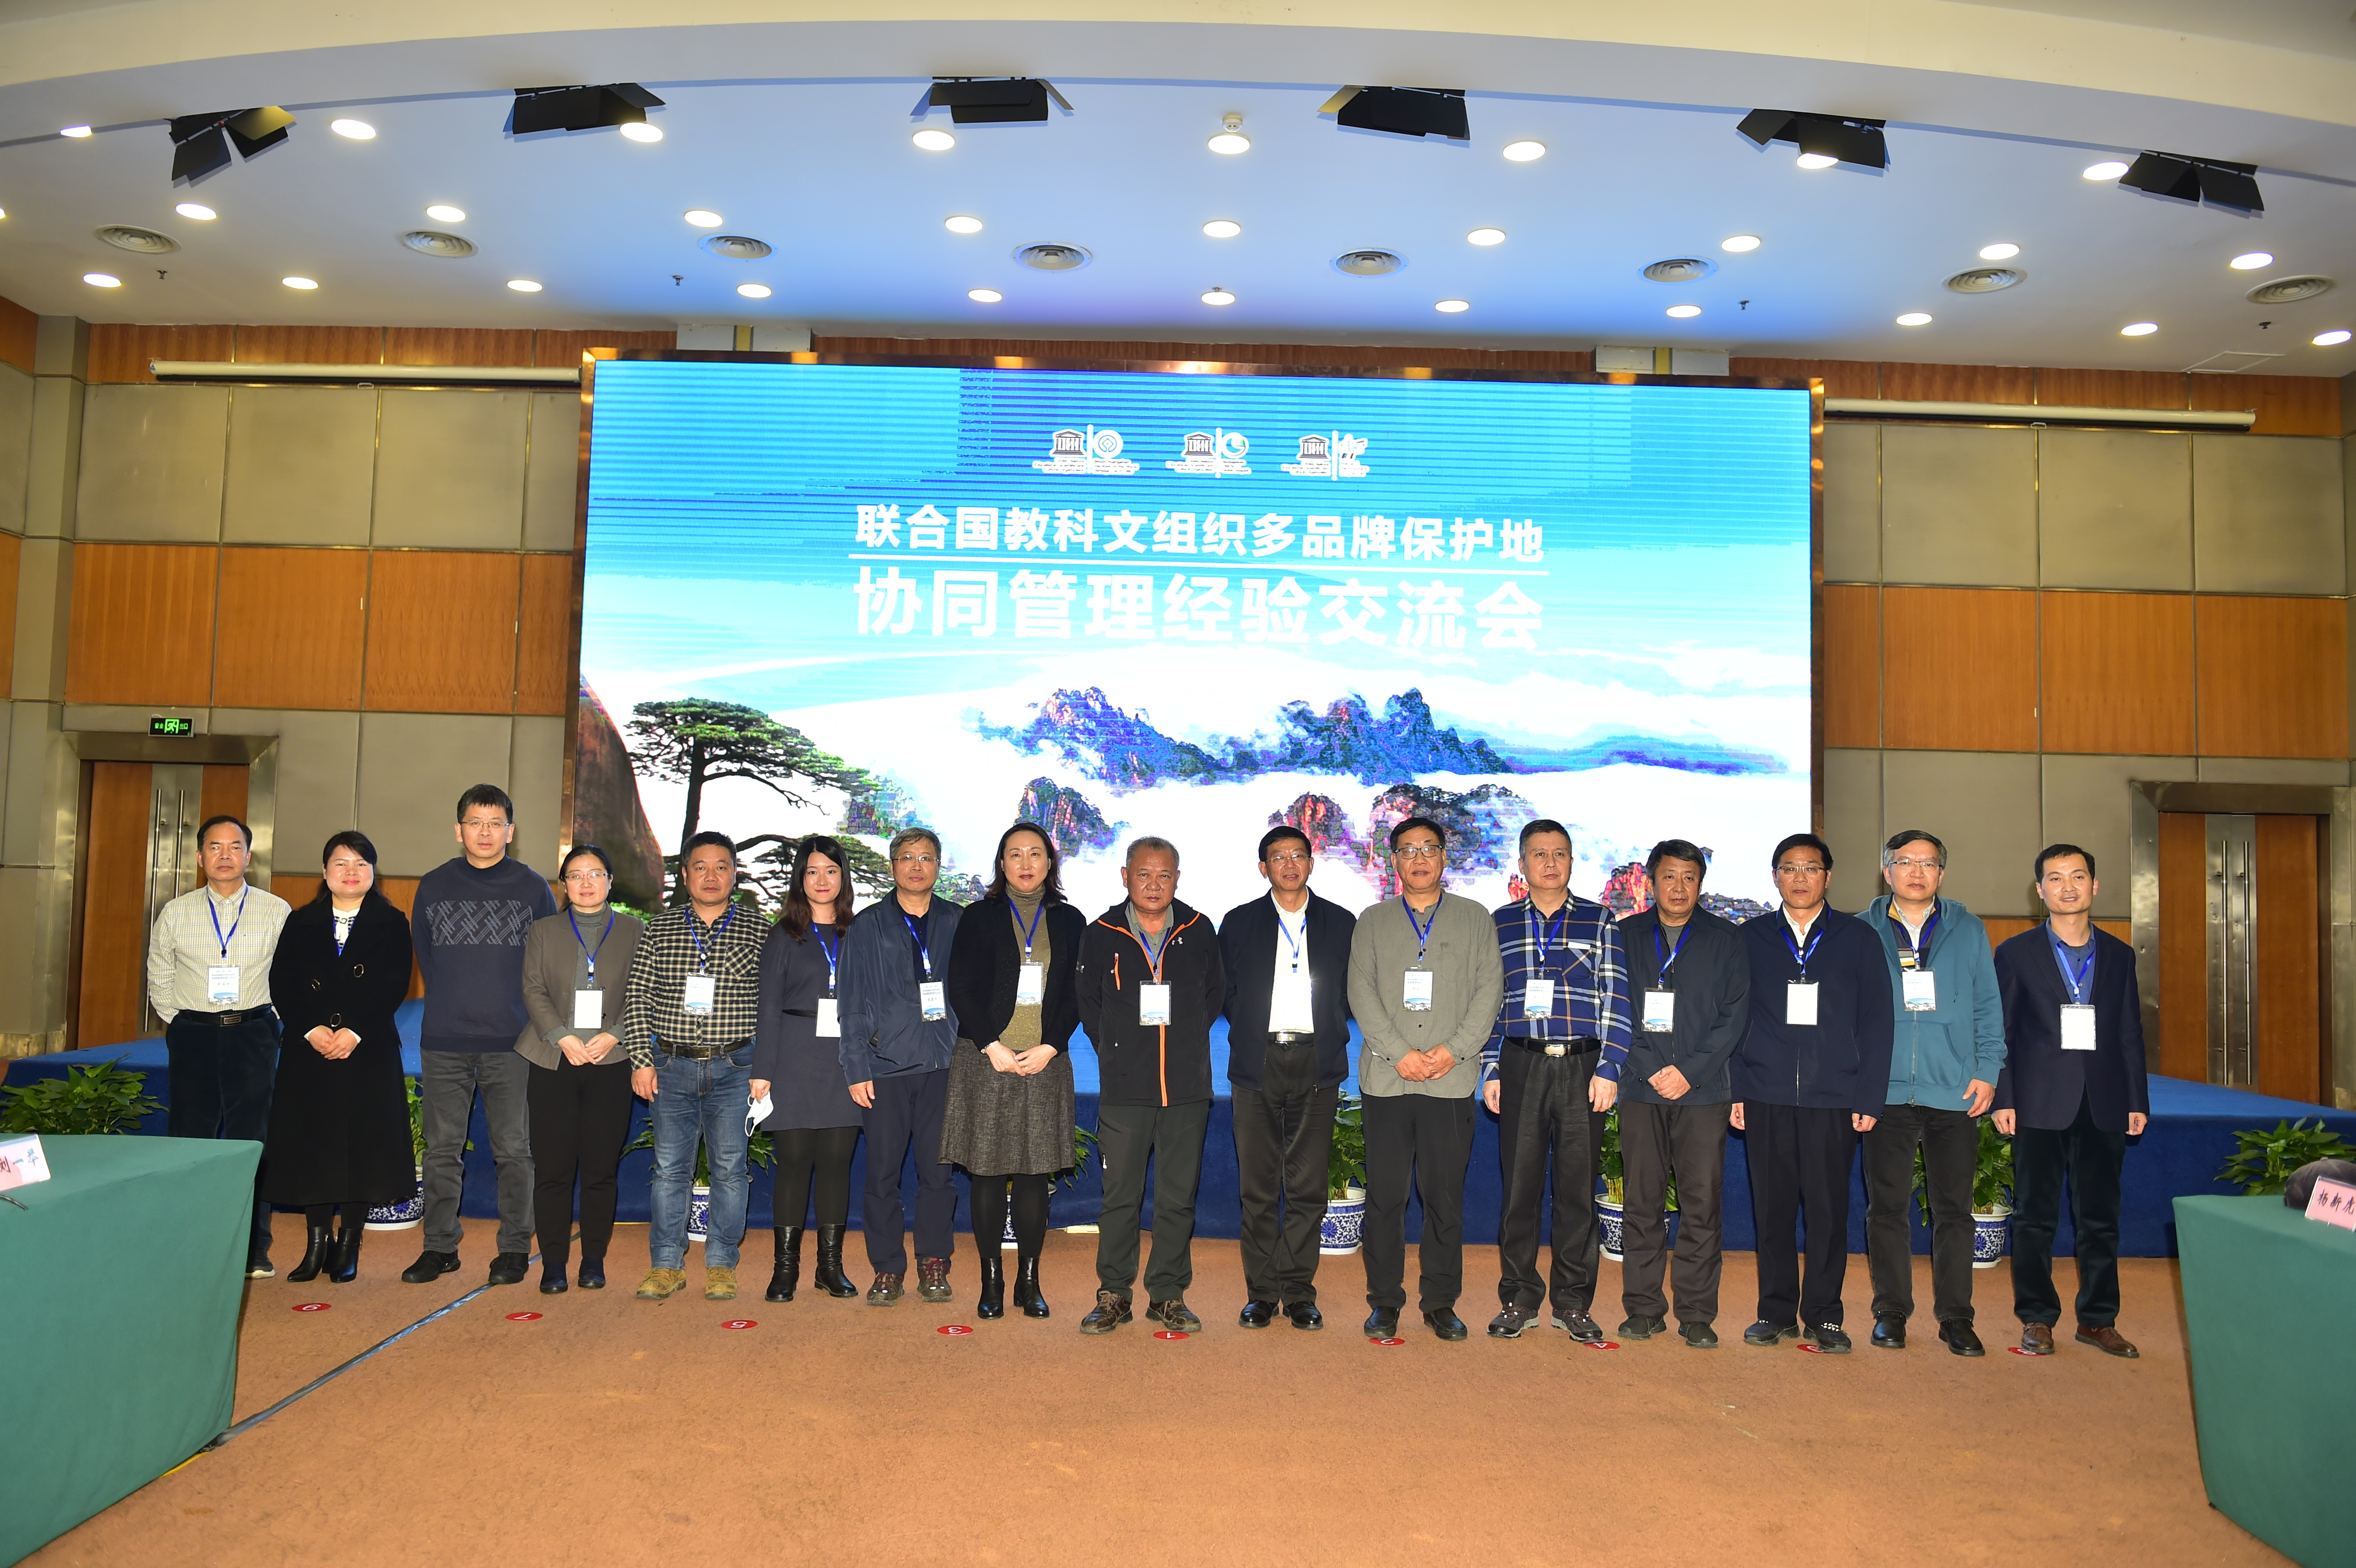 Huangshan Scenic Area Administrative Committee